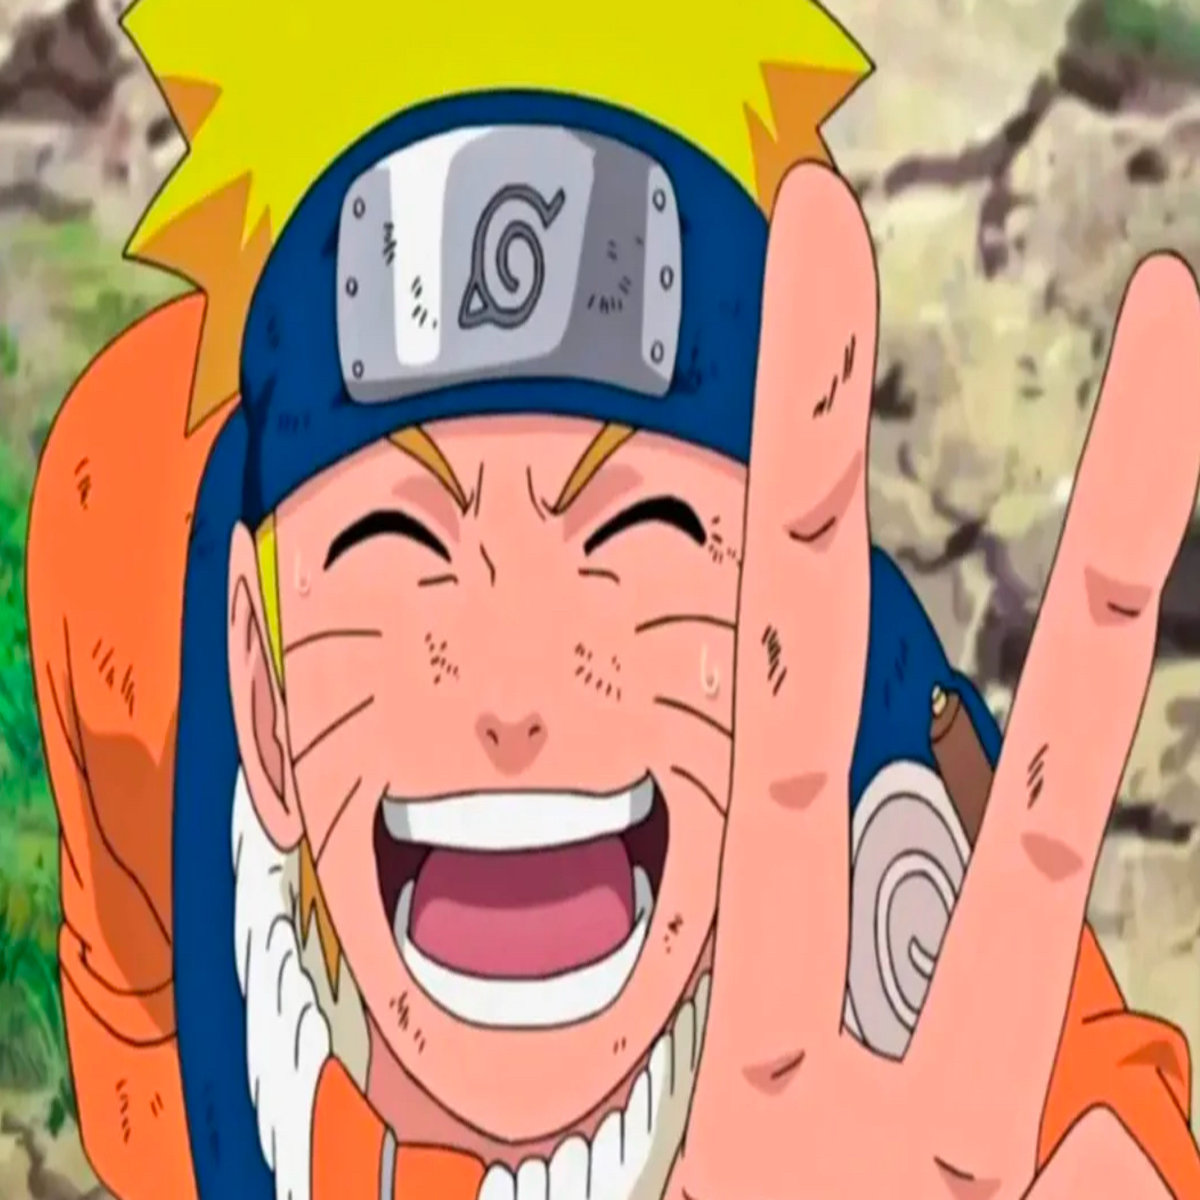 Naruto: How to watch the whole series, movies and OVA in order - Meristation